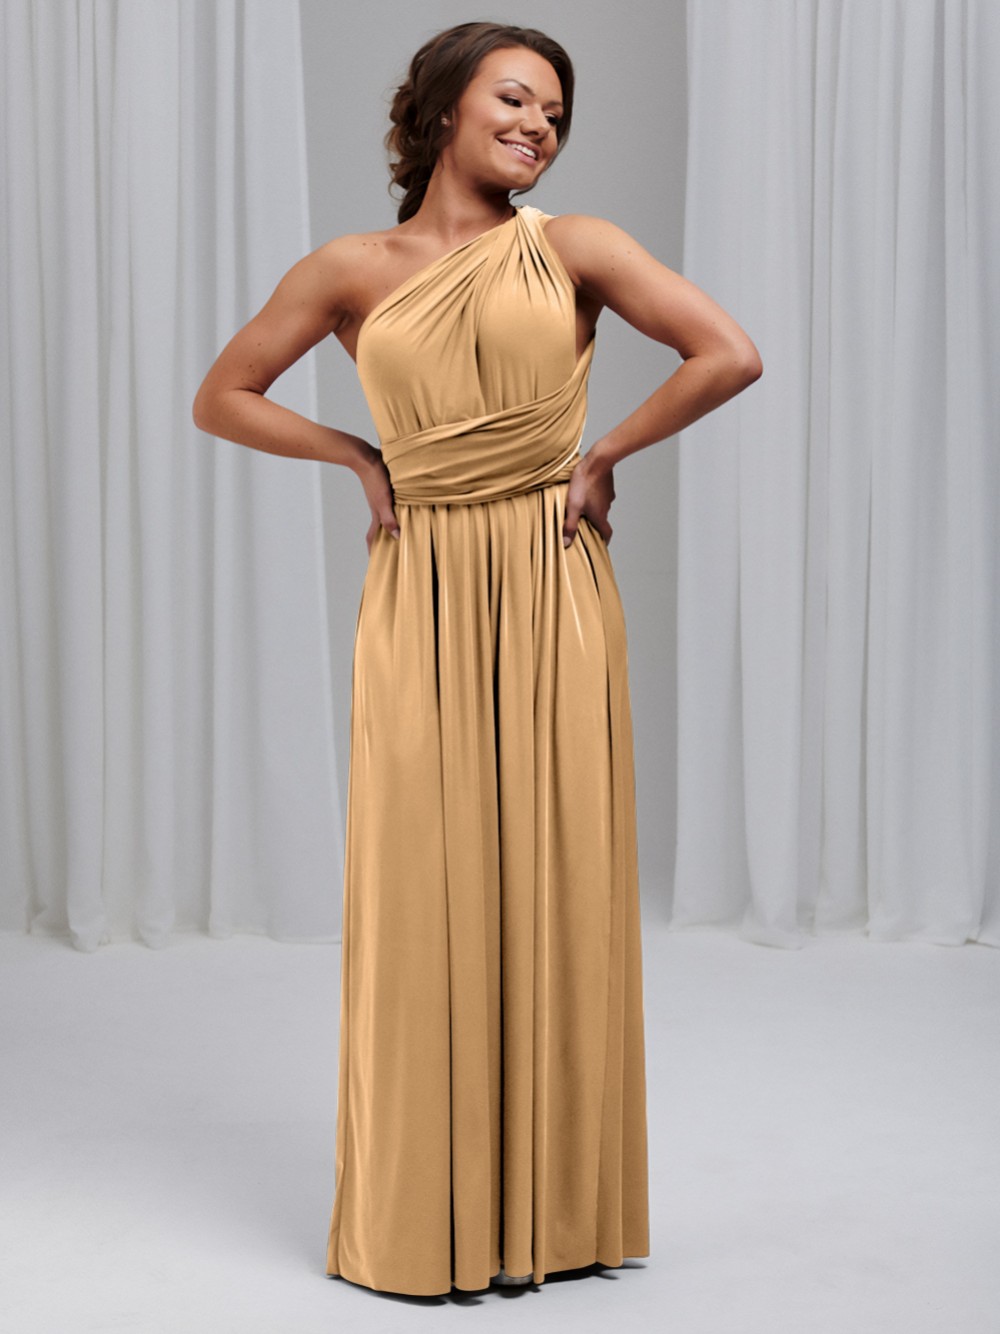 Photograph: Emily Rose Gold Multiway Bridesmaid Dress (One Size)